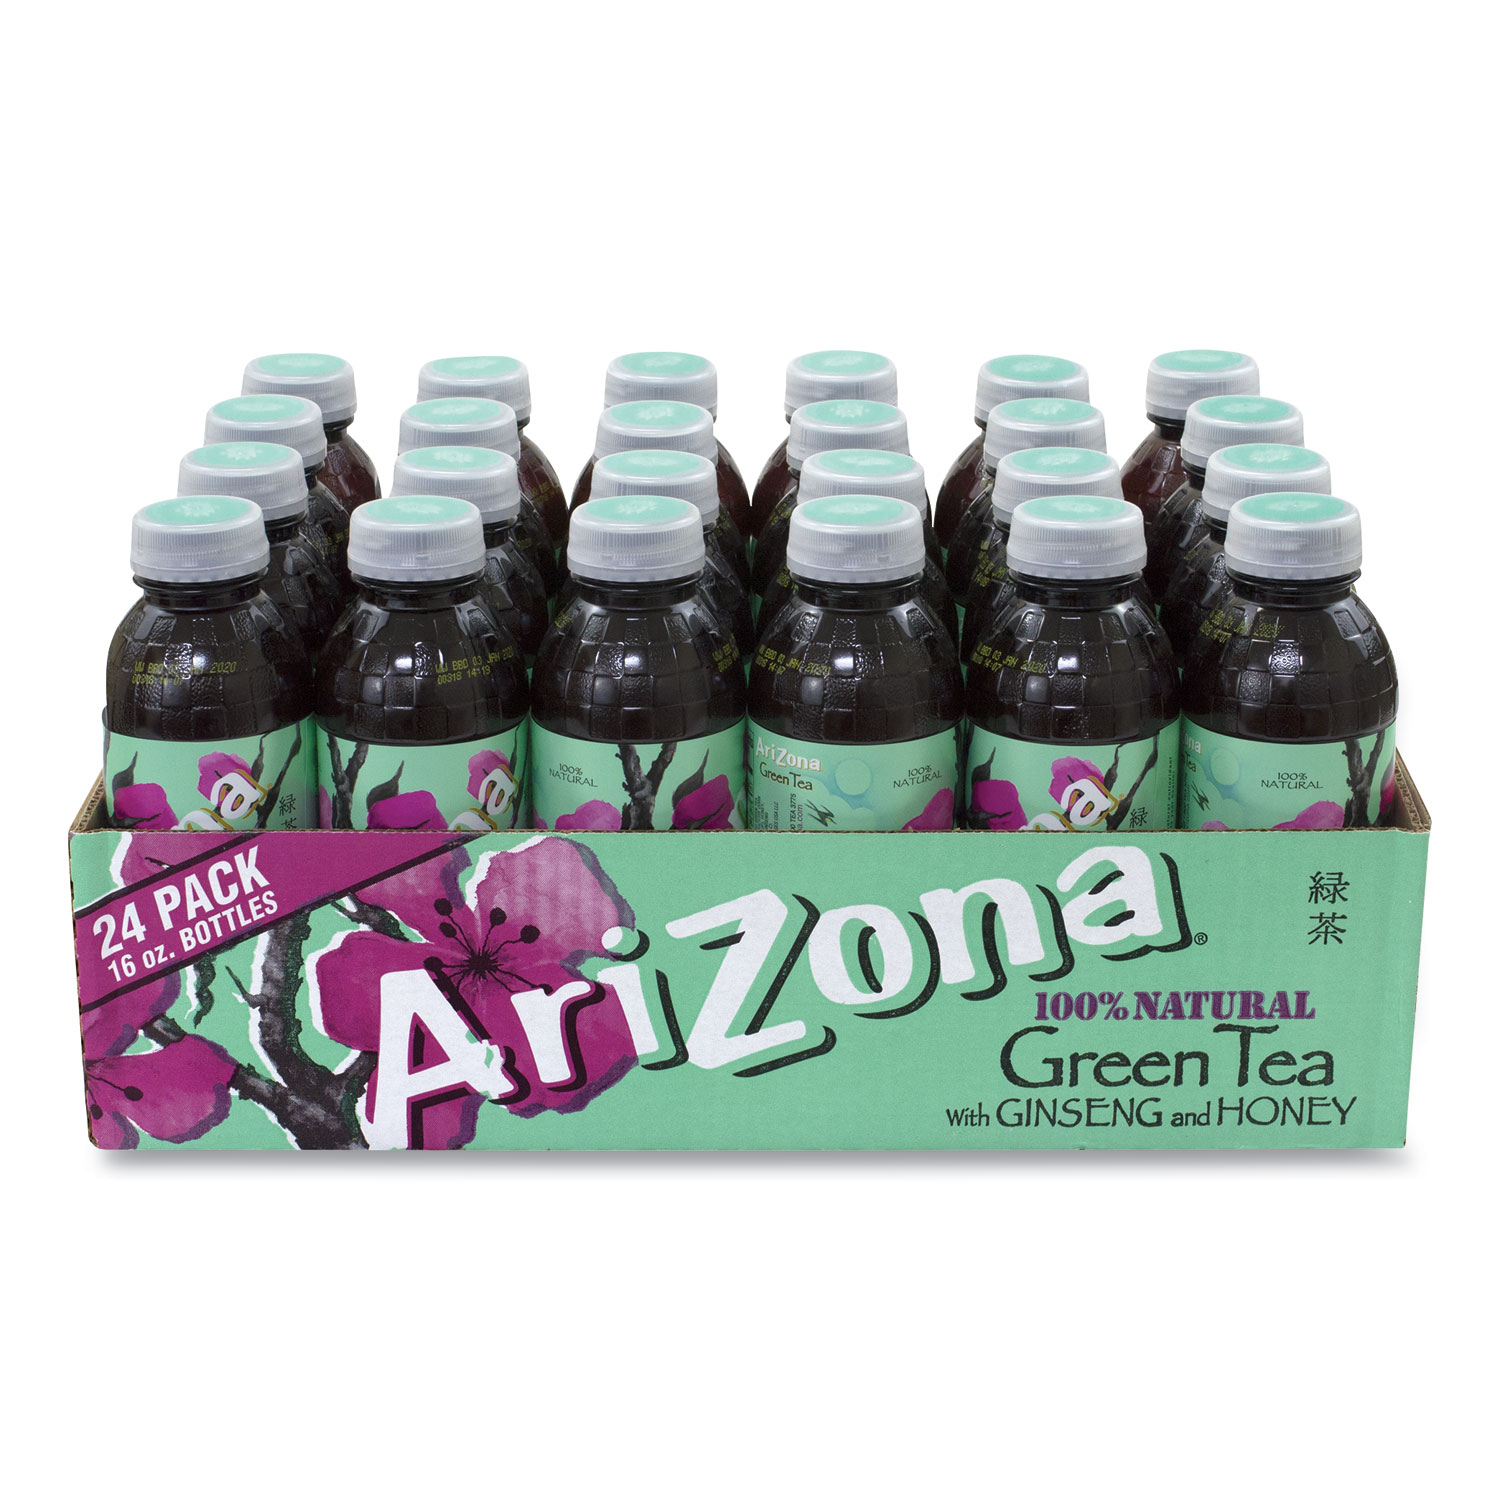  Arizona 72423 Green Tea with Ginseng and Honey, 16 oz Can, 24/Pack, Free Delivery in 1-4 Business Days (GRR90000086) 